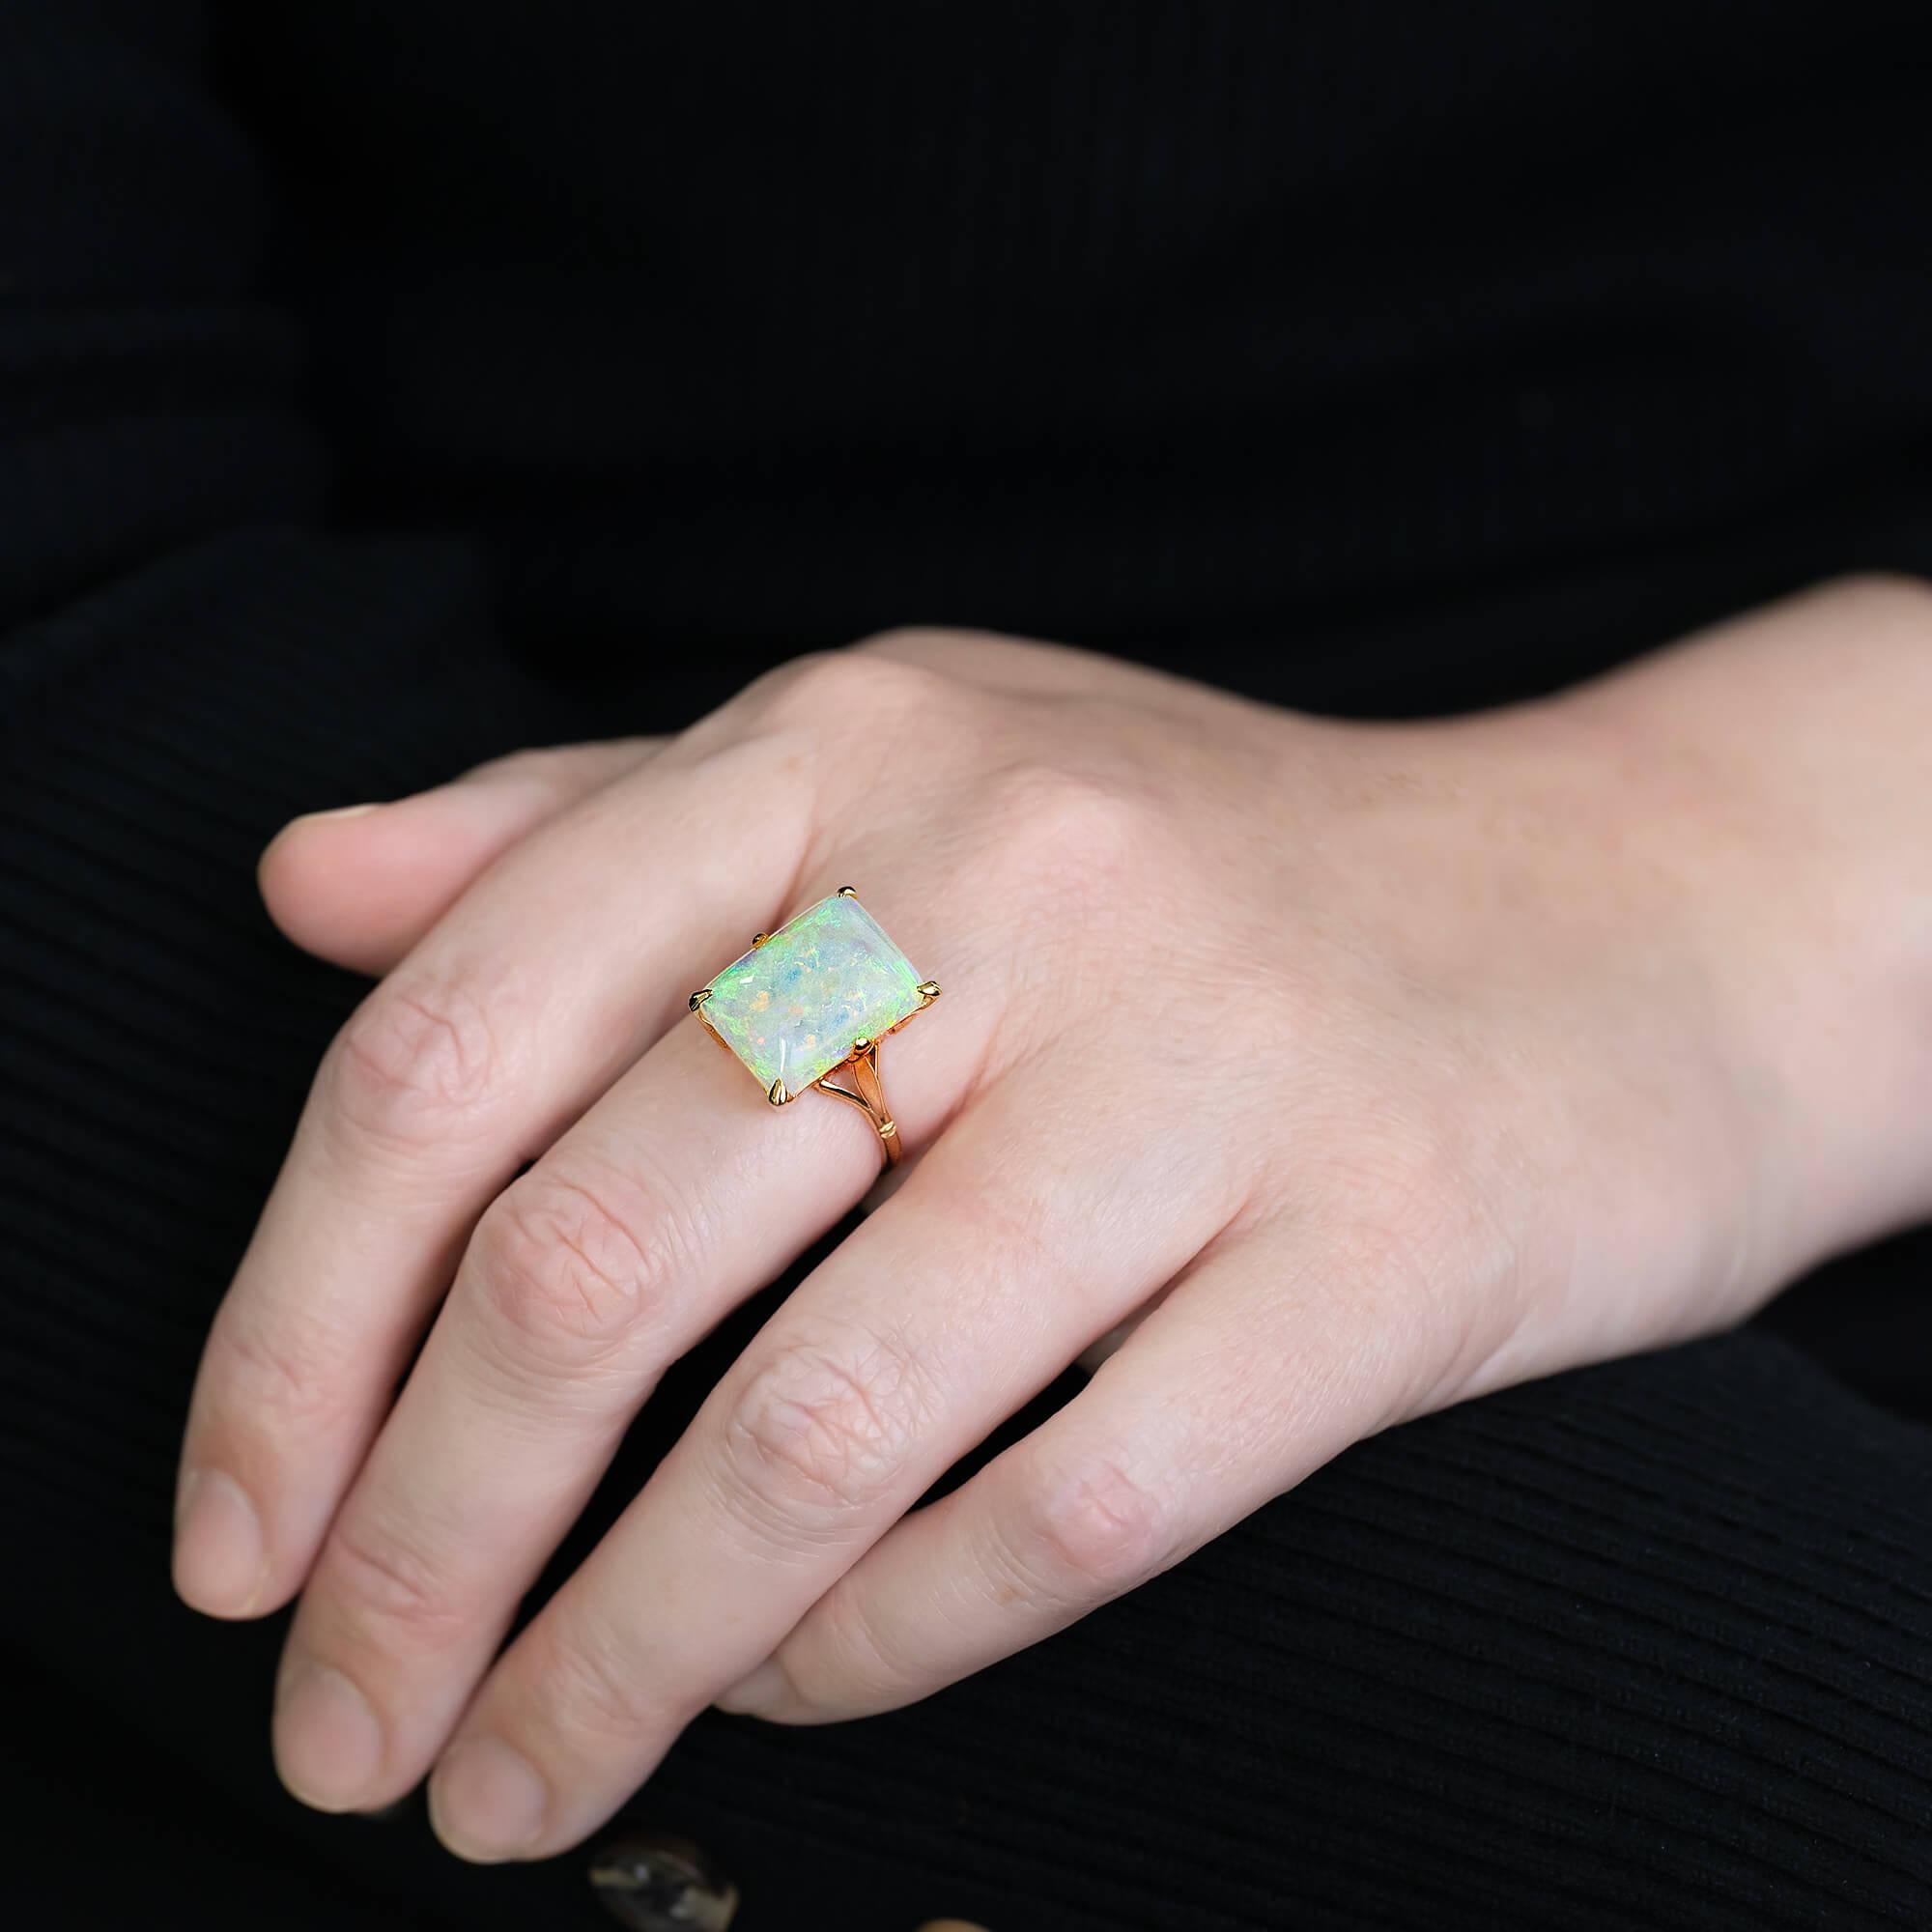 Mid 20th Century Australian opal ring featuring a handmade all yellow gold six claw box coronet with half-round shank. Recently restored and the opal re-polished this ring is ready for its next wearer.

Coober Pedy is a town located in South